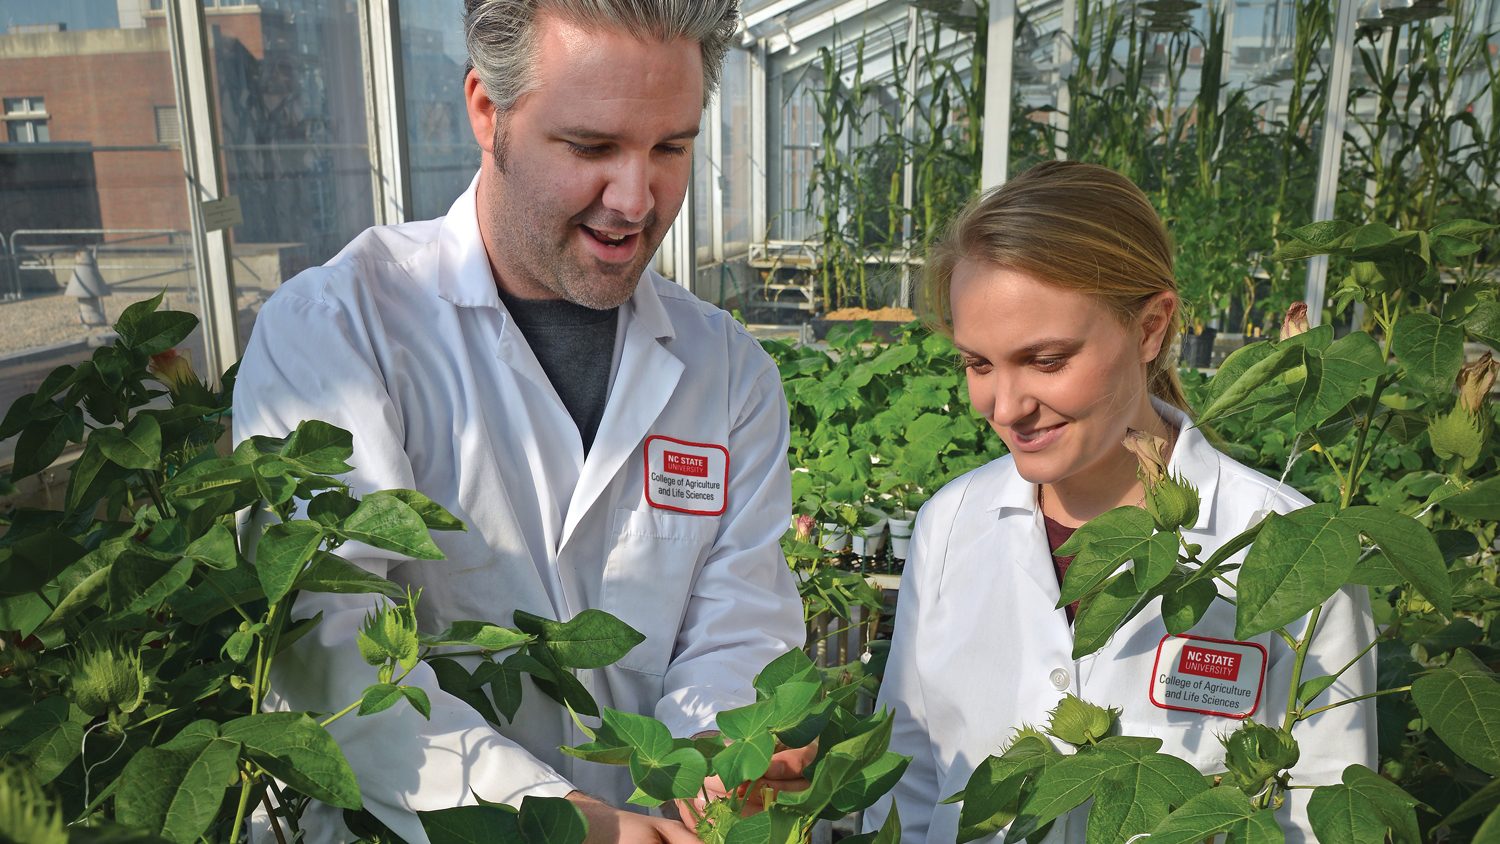 Crop and Soil student and teacher in greenhouse with cottom plants